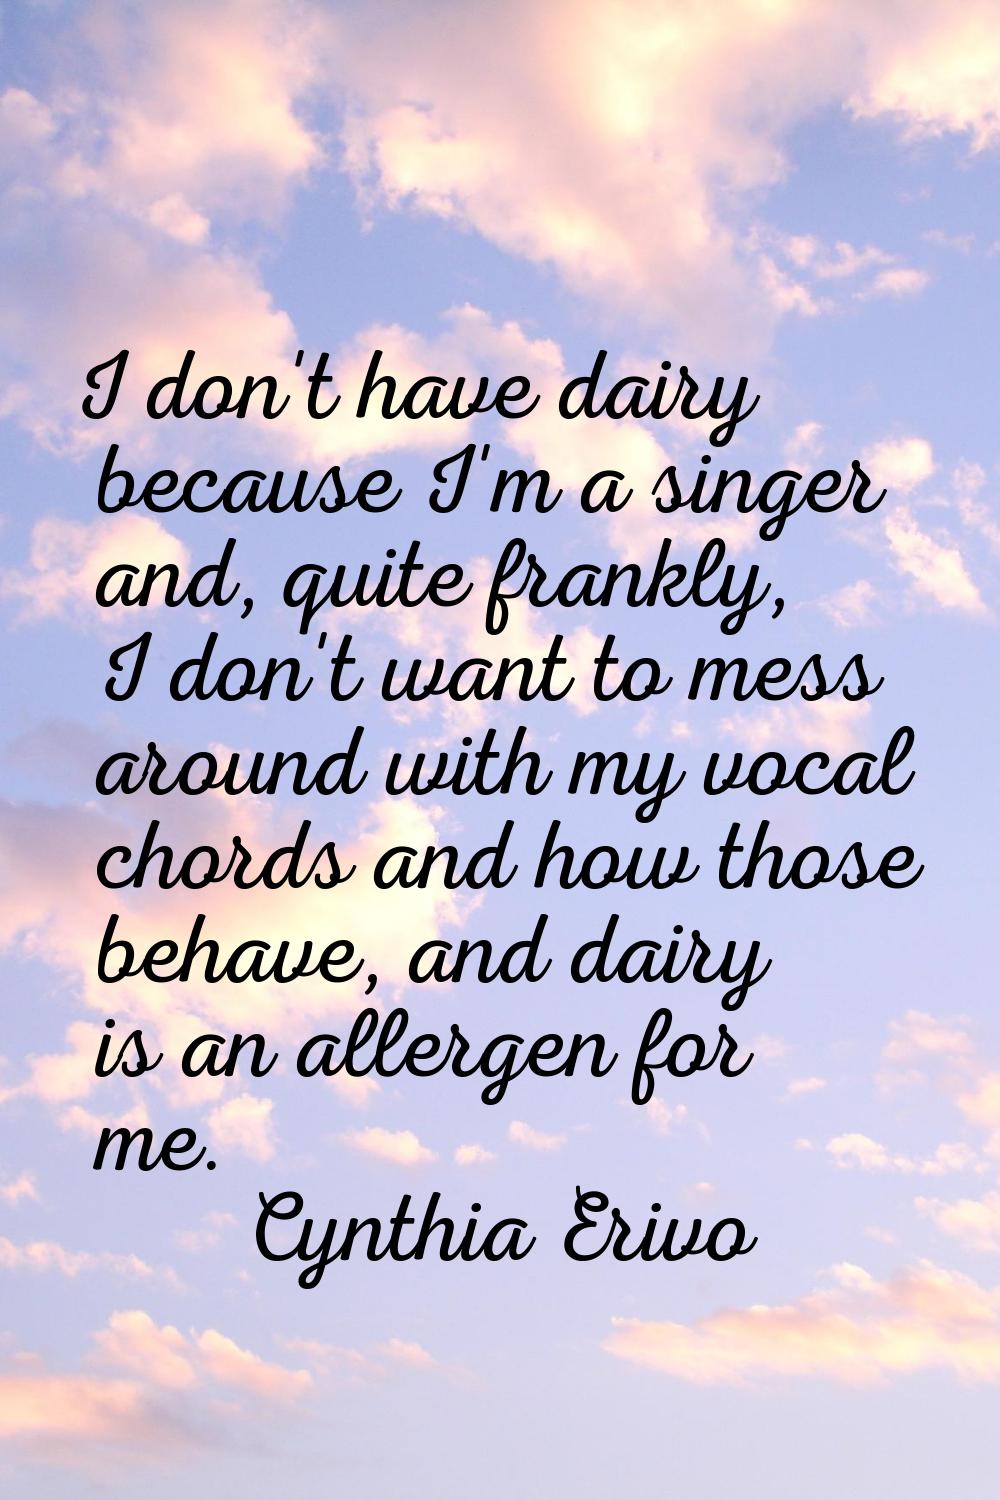 I don't have dairy because I'm a singer and, quite frankly, I don't want to mess around with my voc